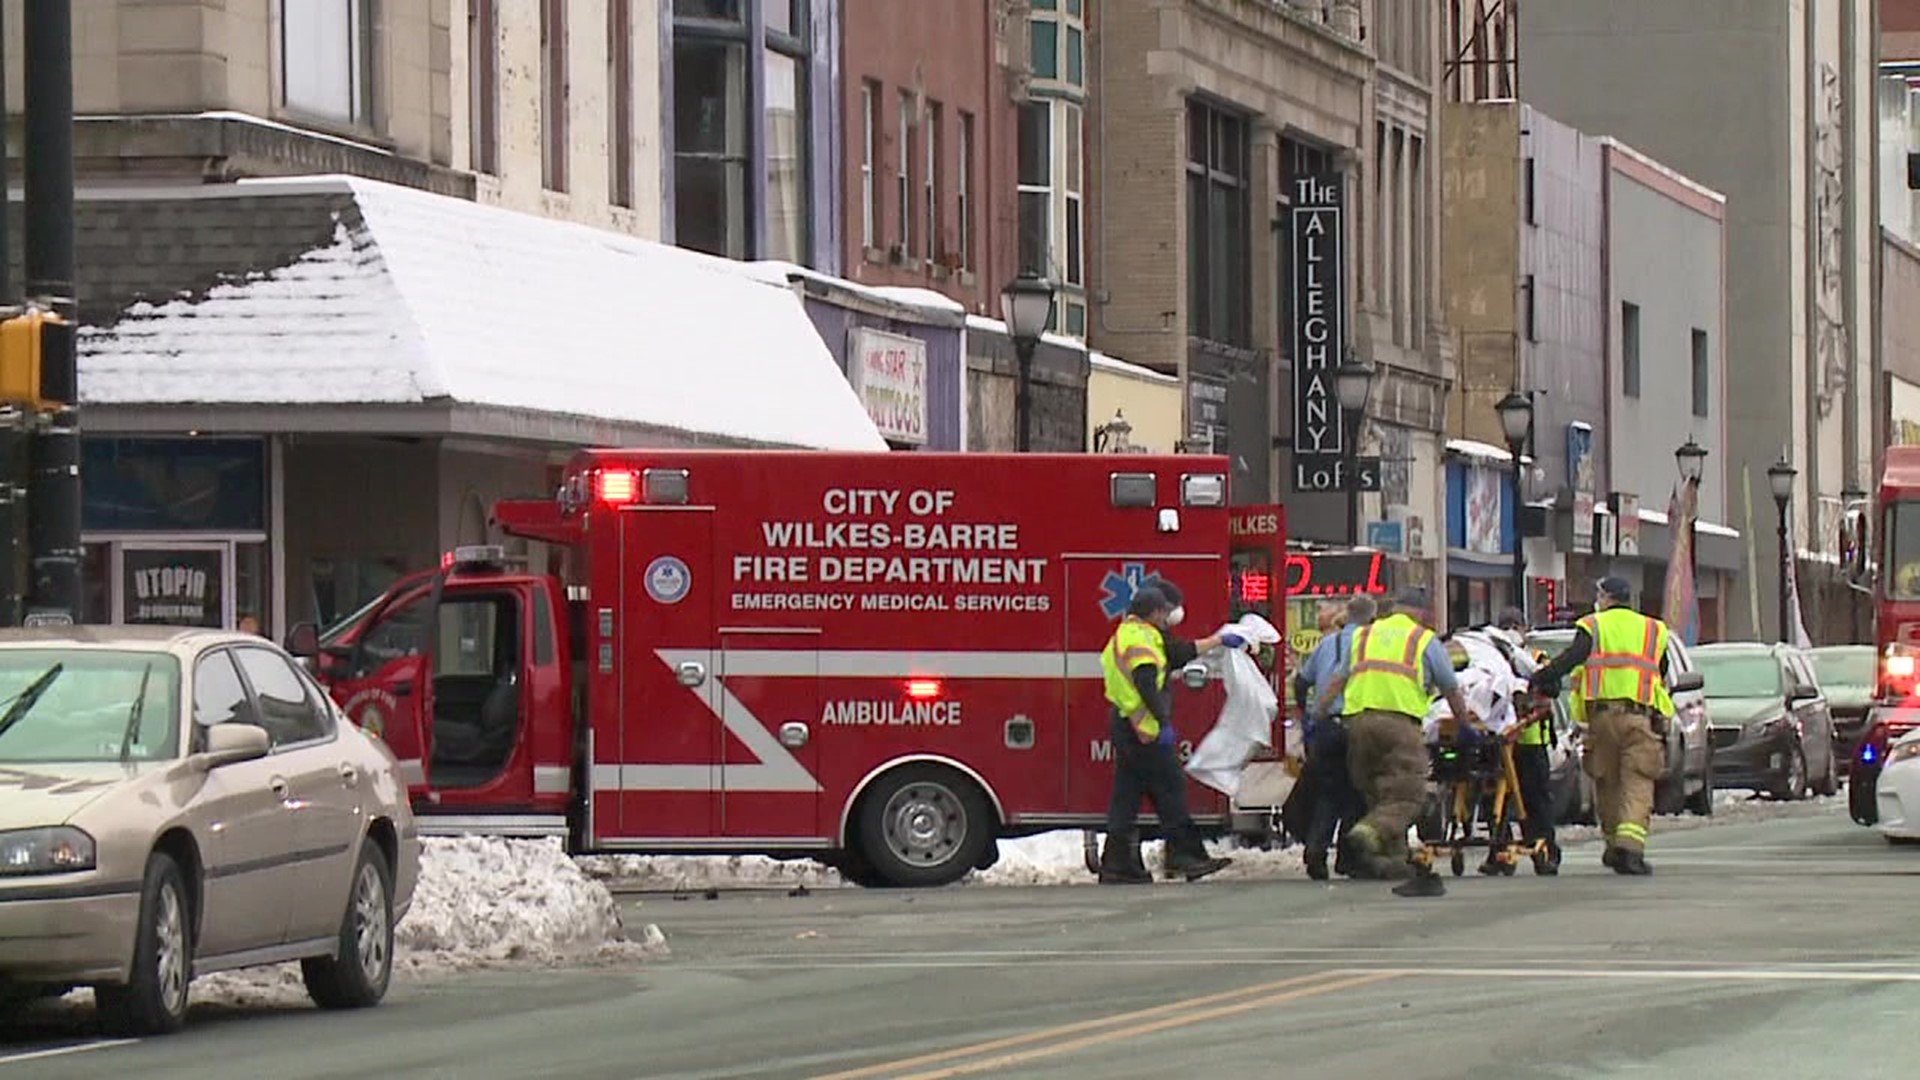 A woman was hit by a car in the city and the driver took off.